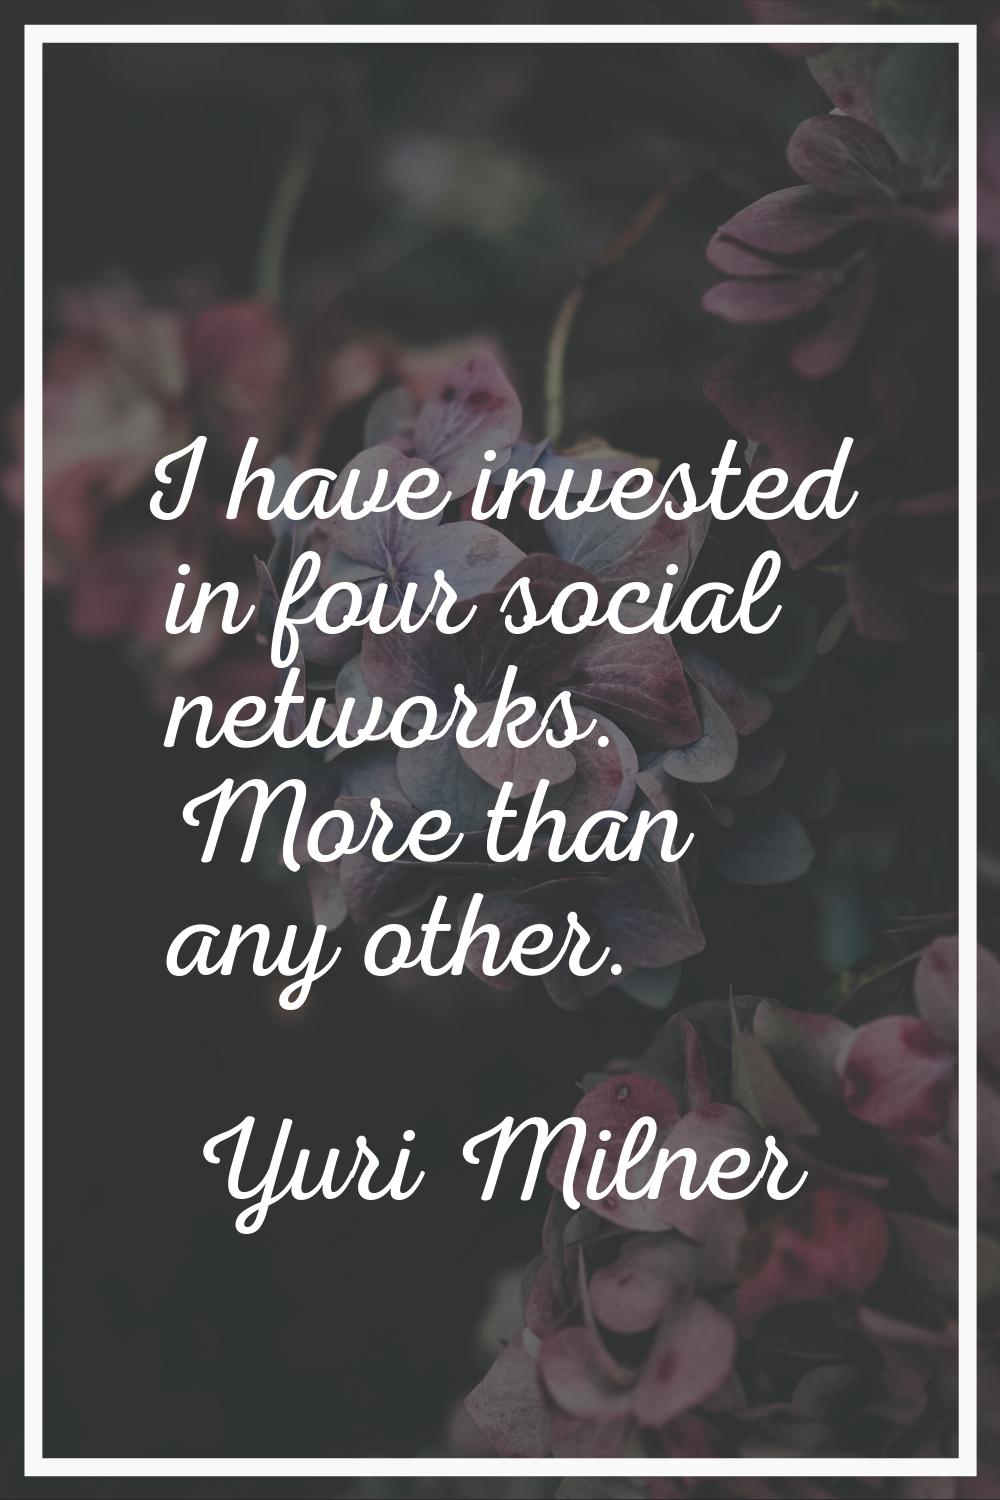 I have invested in four social networks. More than any other.